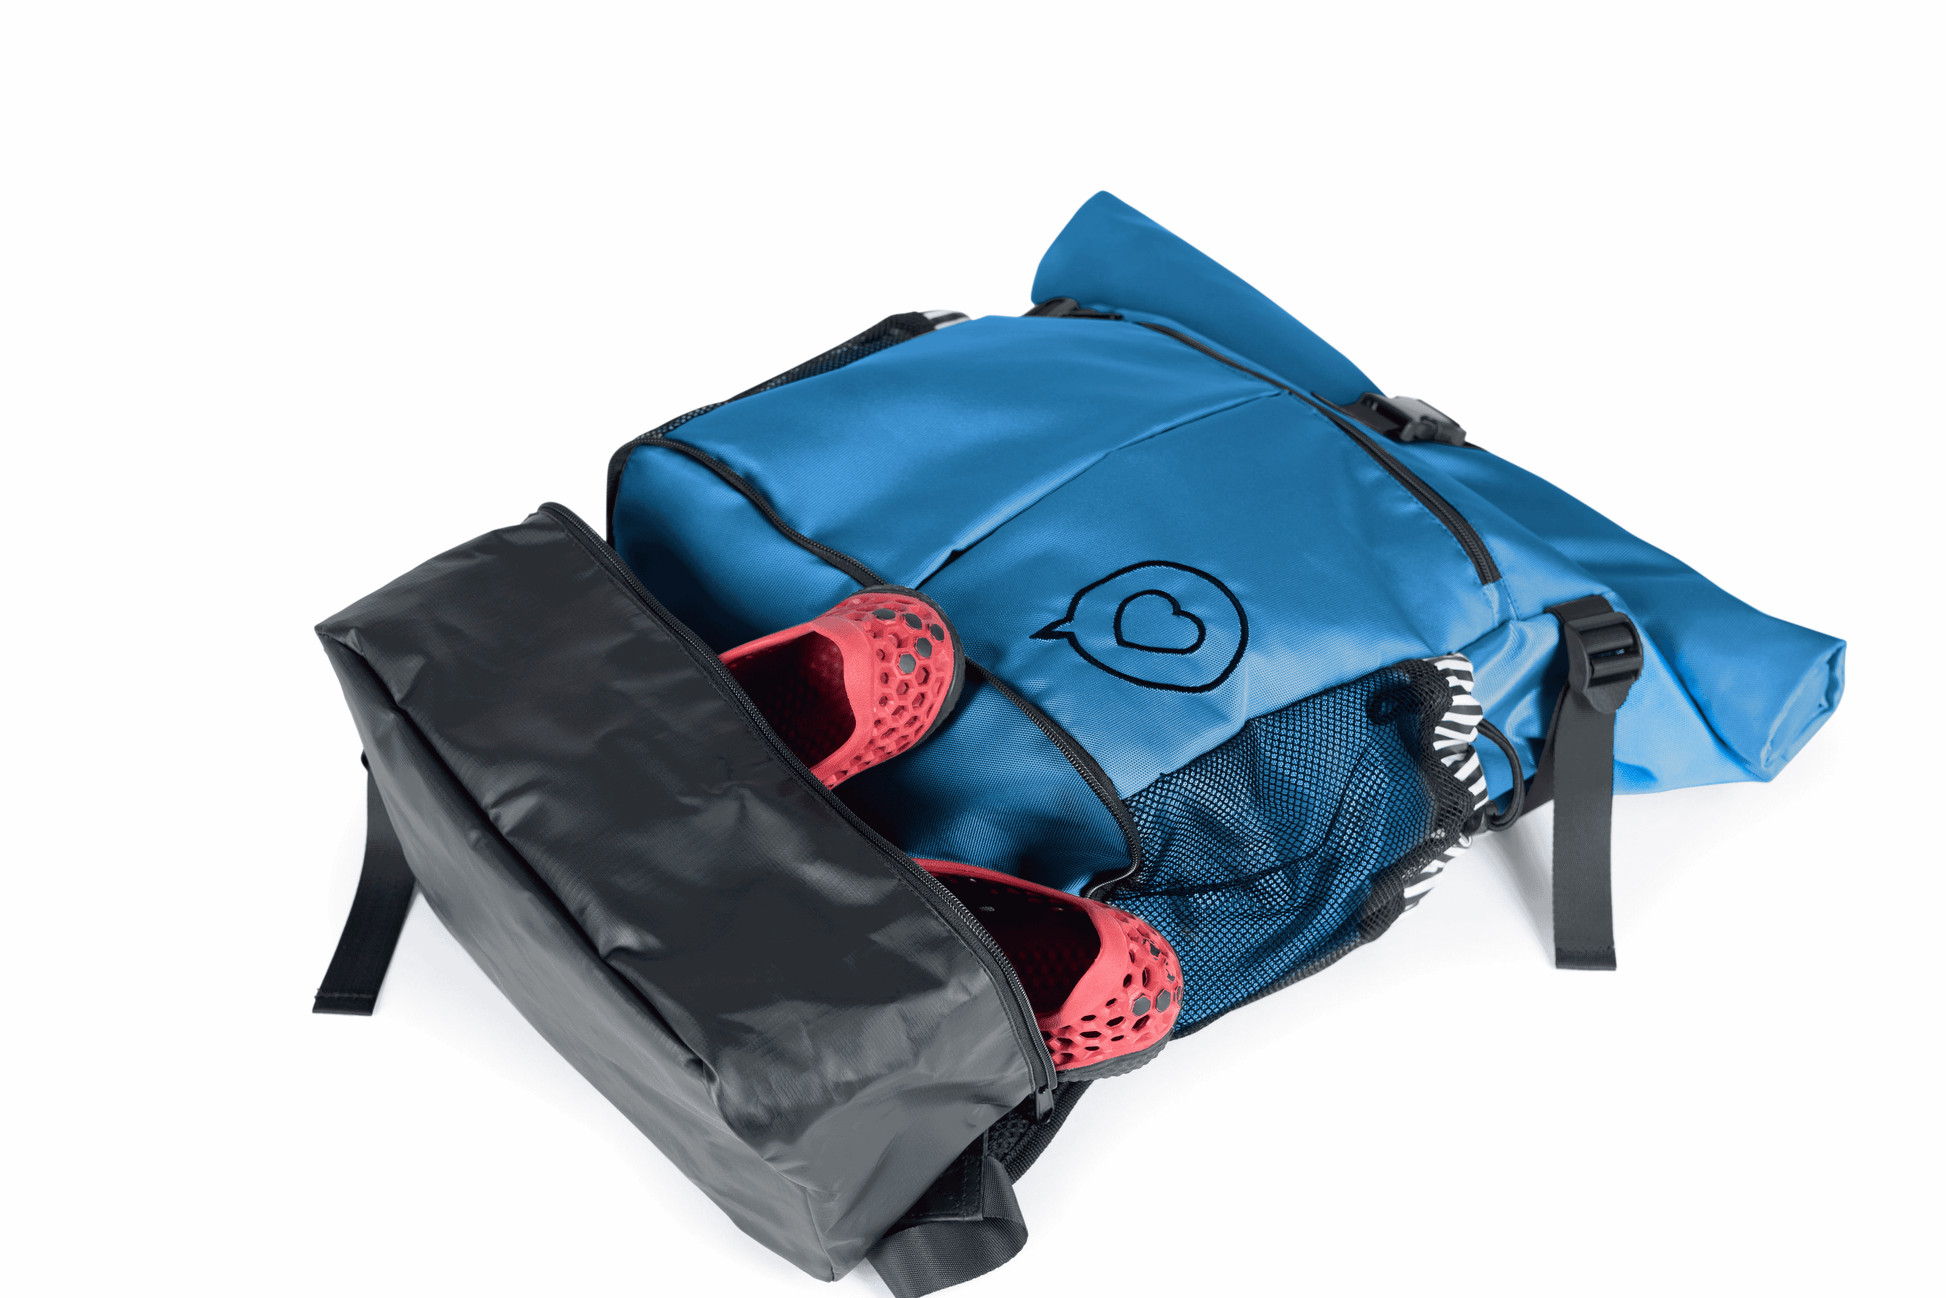 The Roo betty Nyx back pack has a wipeable zipped compartment for your trainers or a lunch box